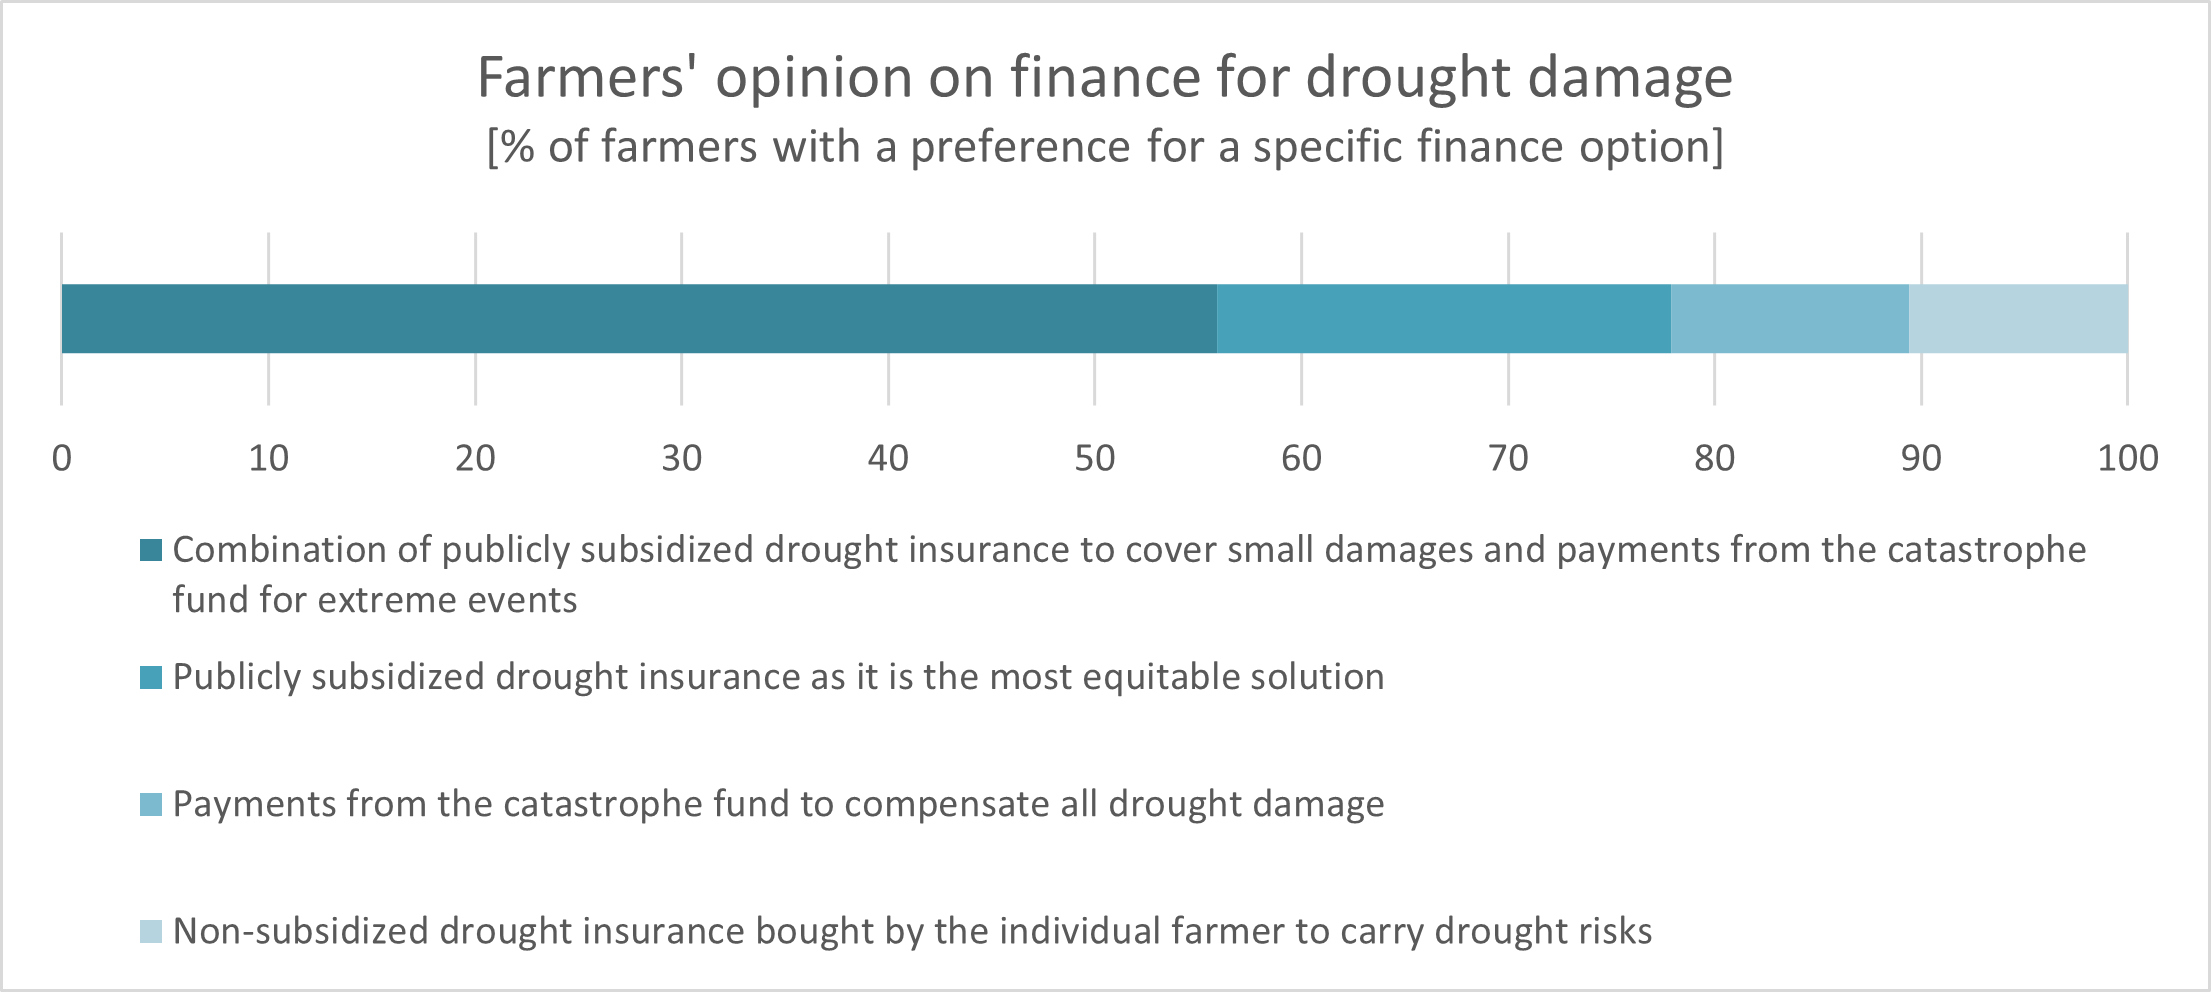 Farmers' opinion on financing drought risks